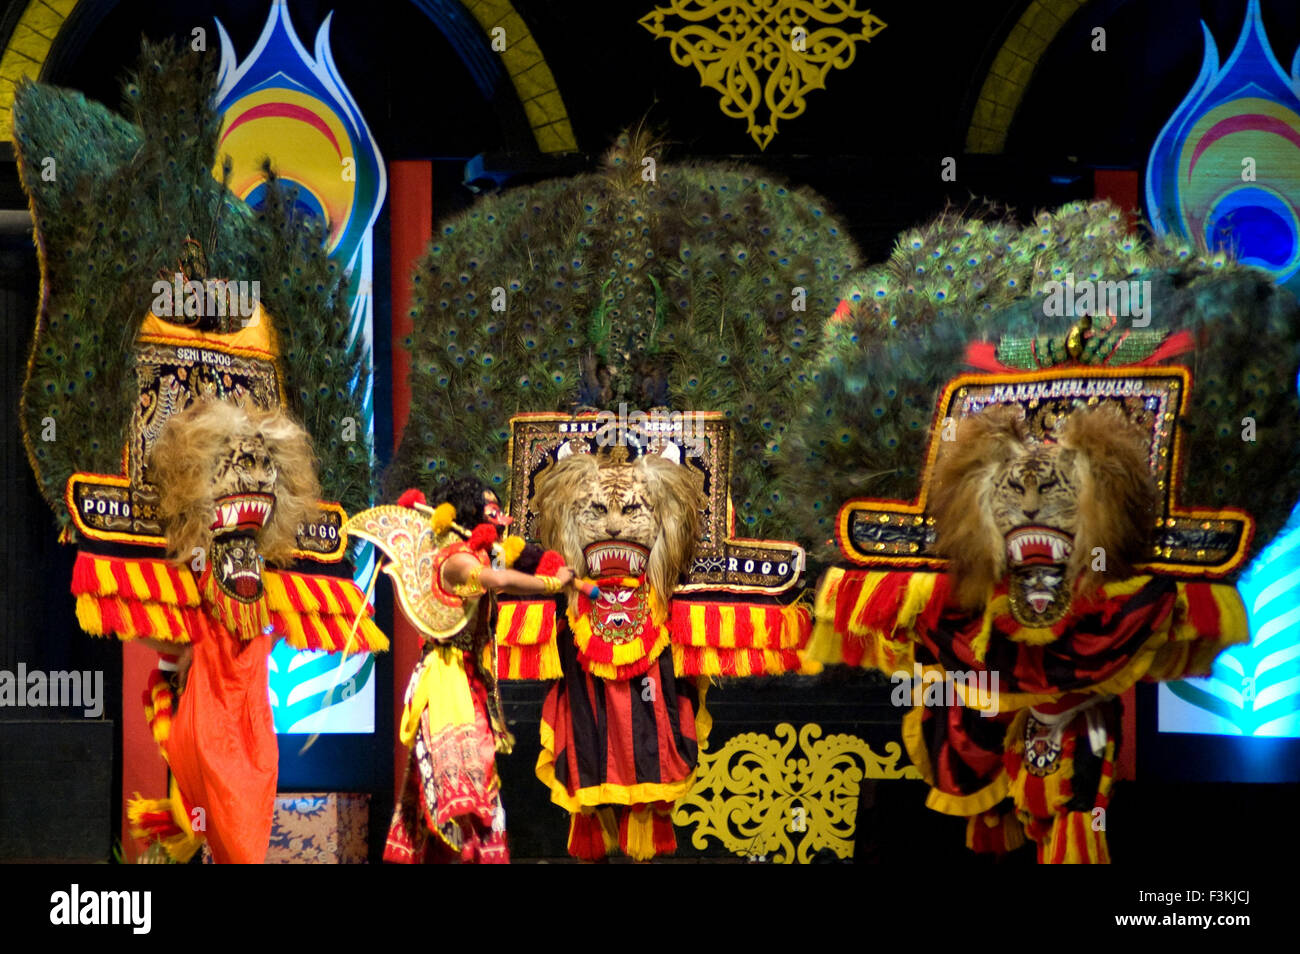 Ponorogo, Indonesia. 8th Oct, 2015. Dancers perform Reog Ponorogo during National Reog Ponorogo Festival in Ponorogo, East Java, Indonesia, Oct. 8, 2015. Reog Ponorogo festival is celebrated every year with a kind of dance performance that demonstrates physical strength and extravagant lion-peafowl masks and costumes. © Kurniawan/Xinhua/Alamy Live News Stock Photo